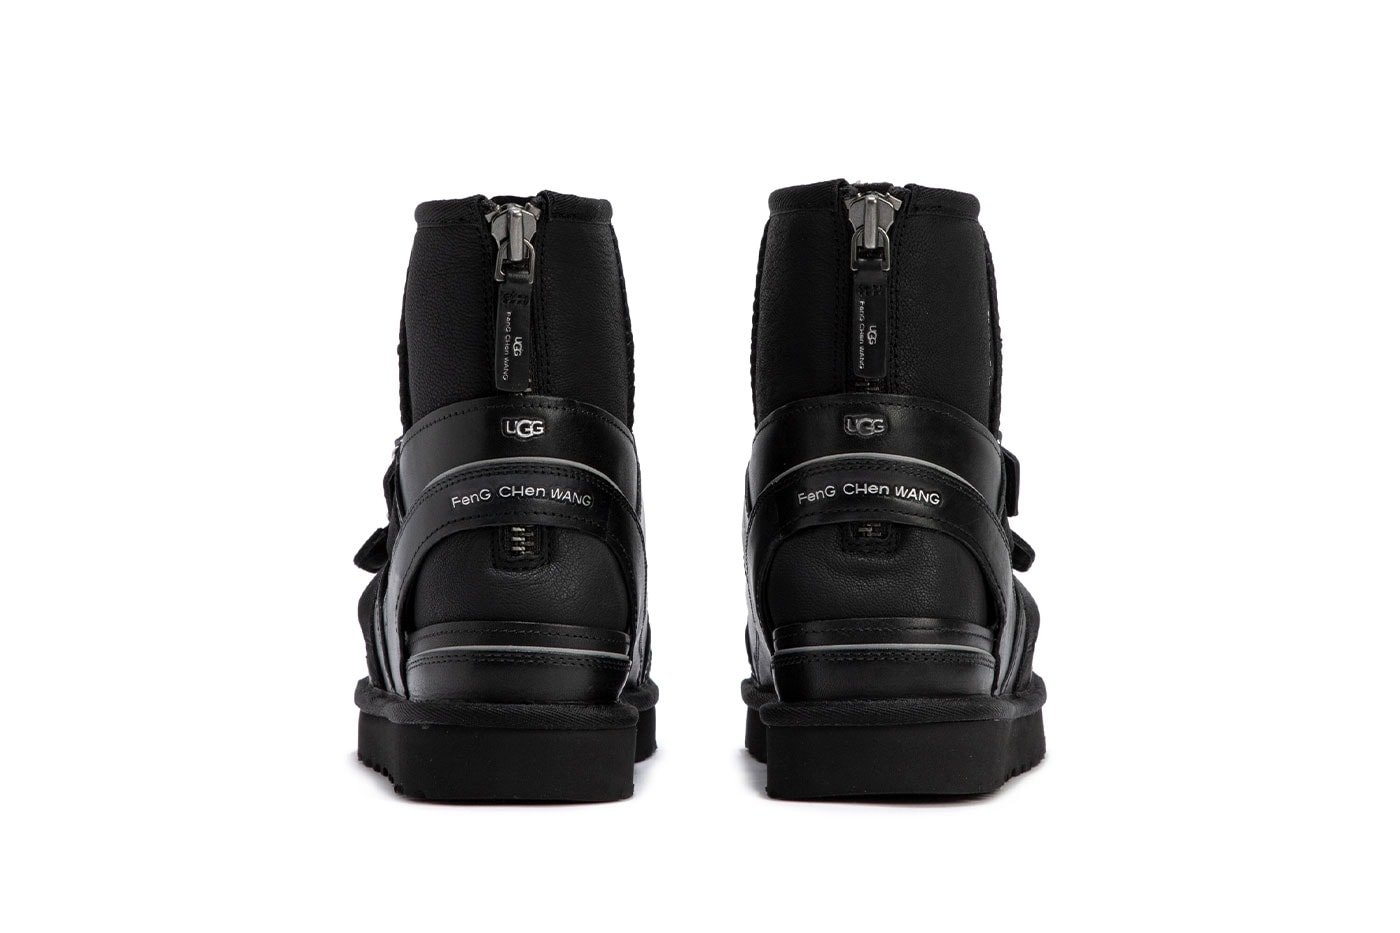 Feng Chen Wang UGG Sandal HBX Release Black Price Info 3-in-1 Winter Boots 